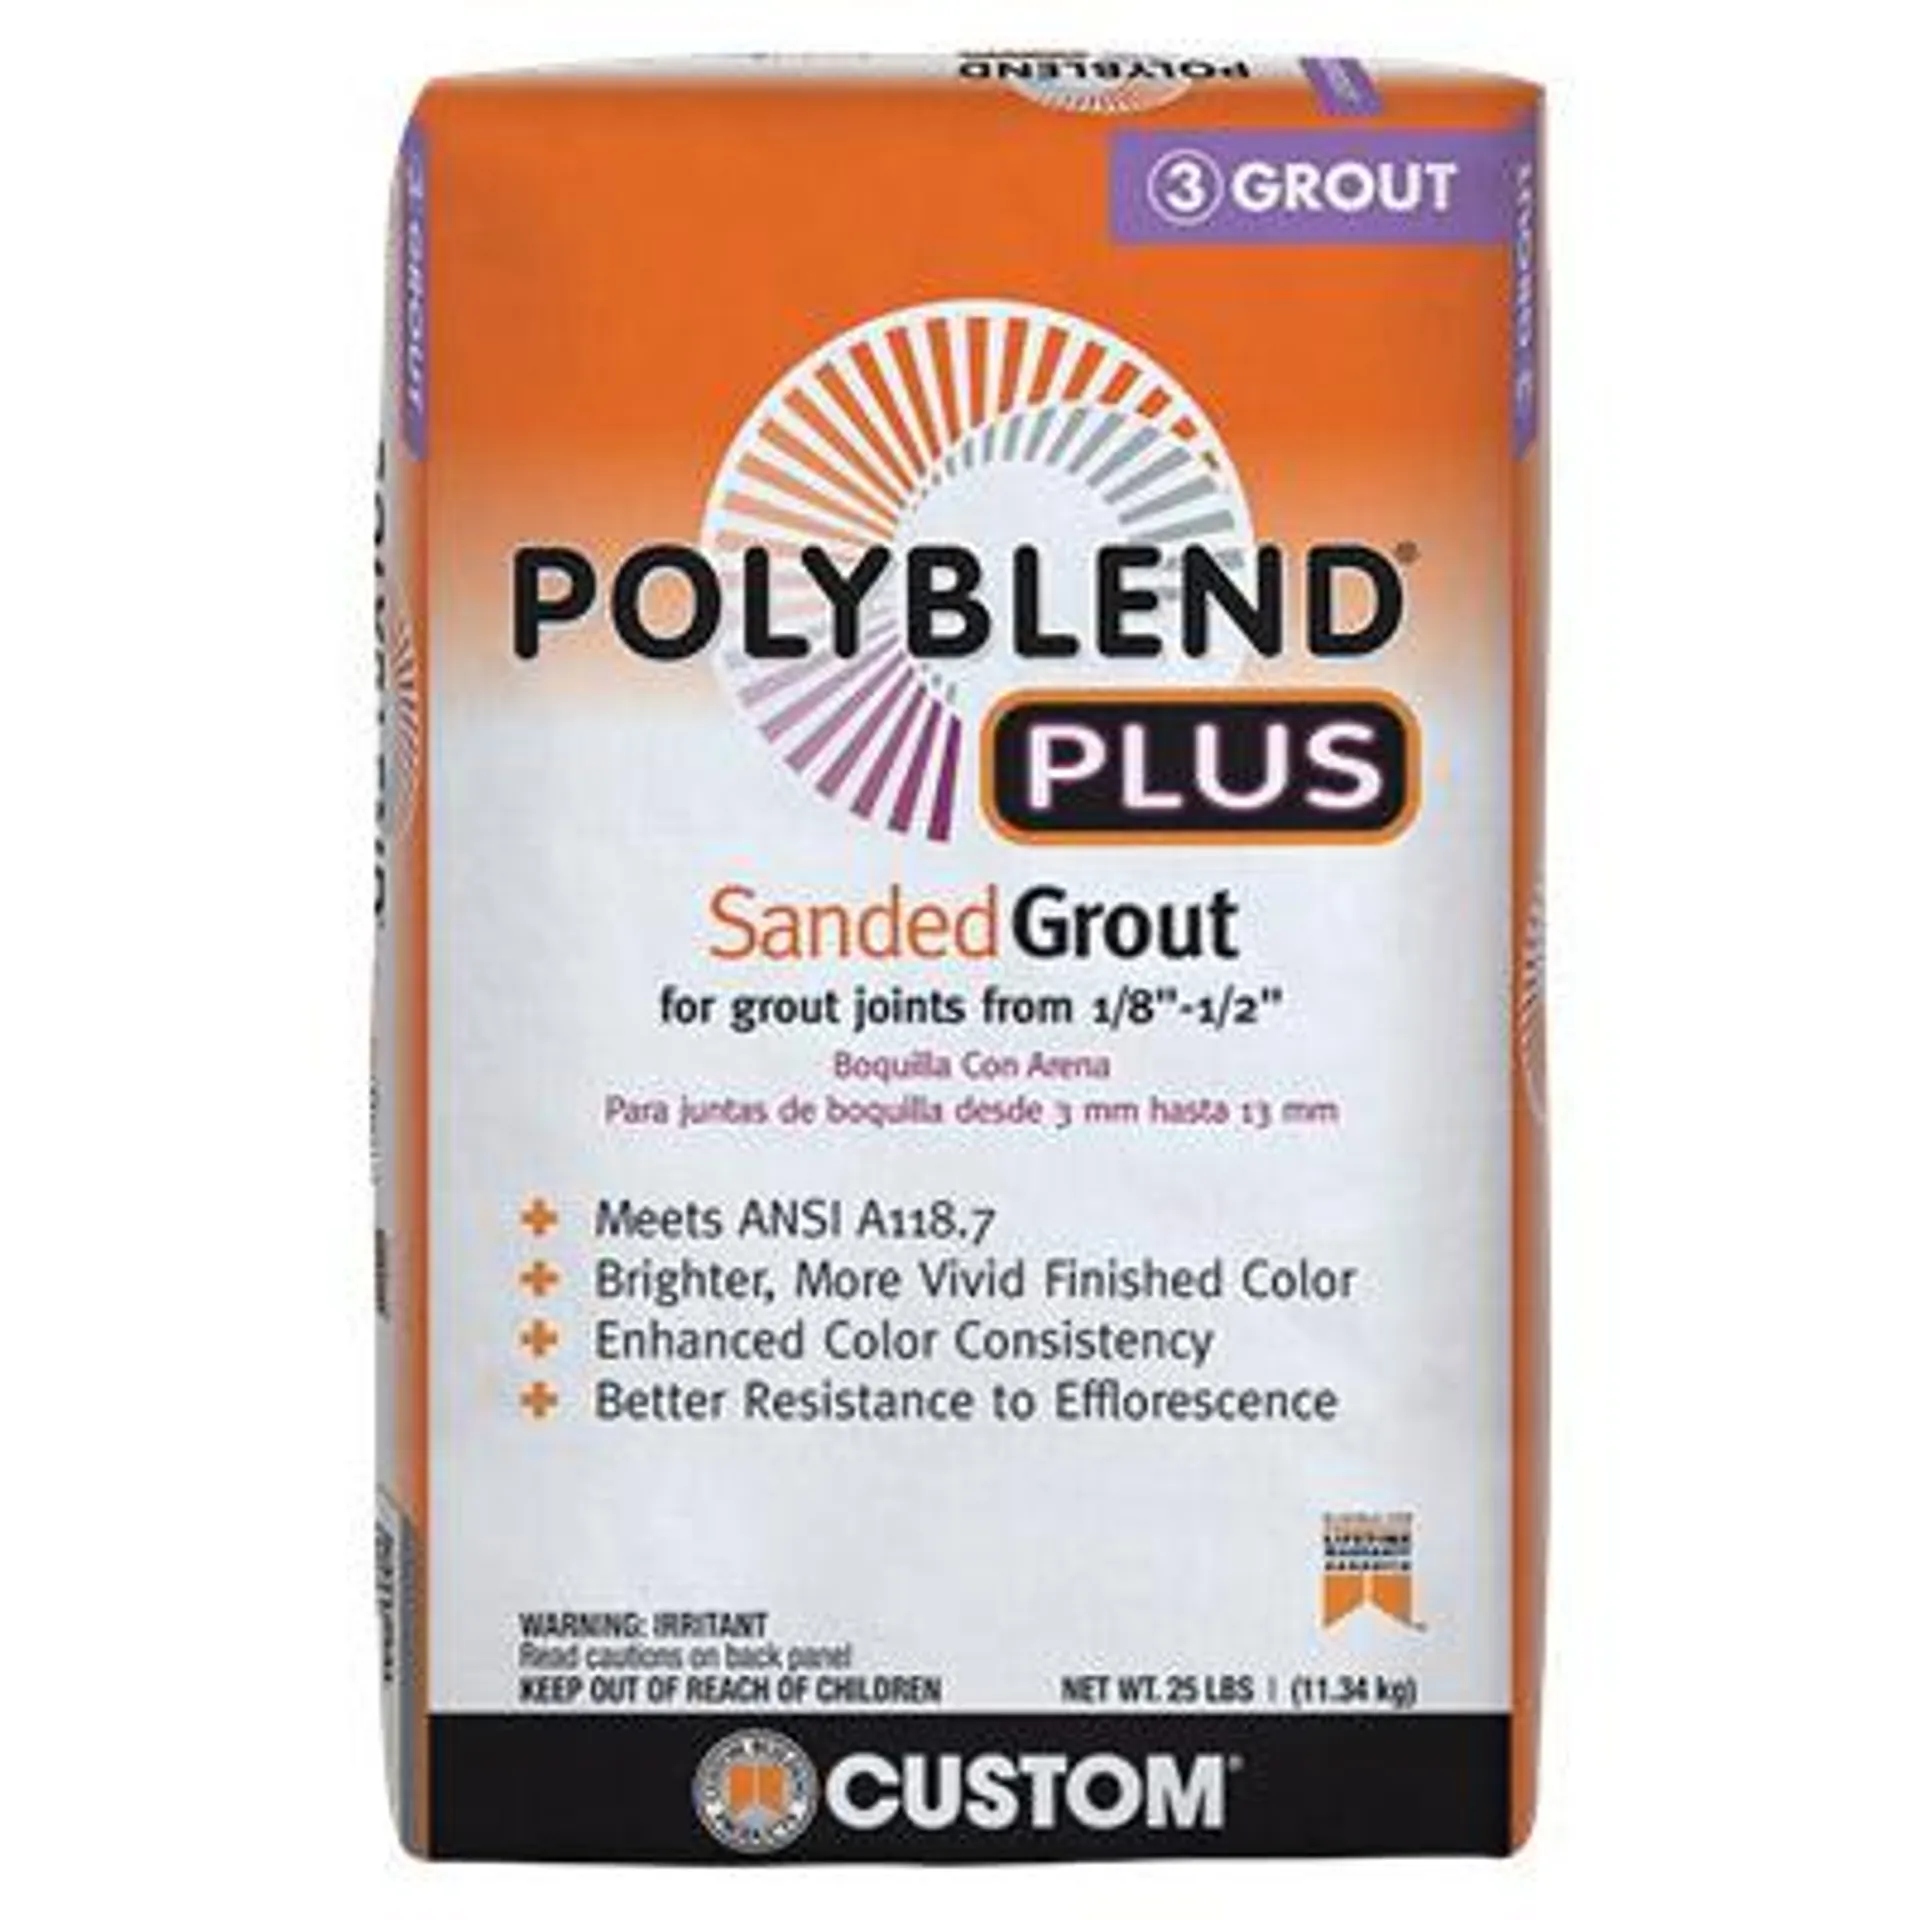 Polyblend Plus PBPG38125 Sanded Grout, Powder, Characteristic, Bright White, 25 lb Bag